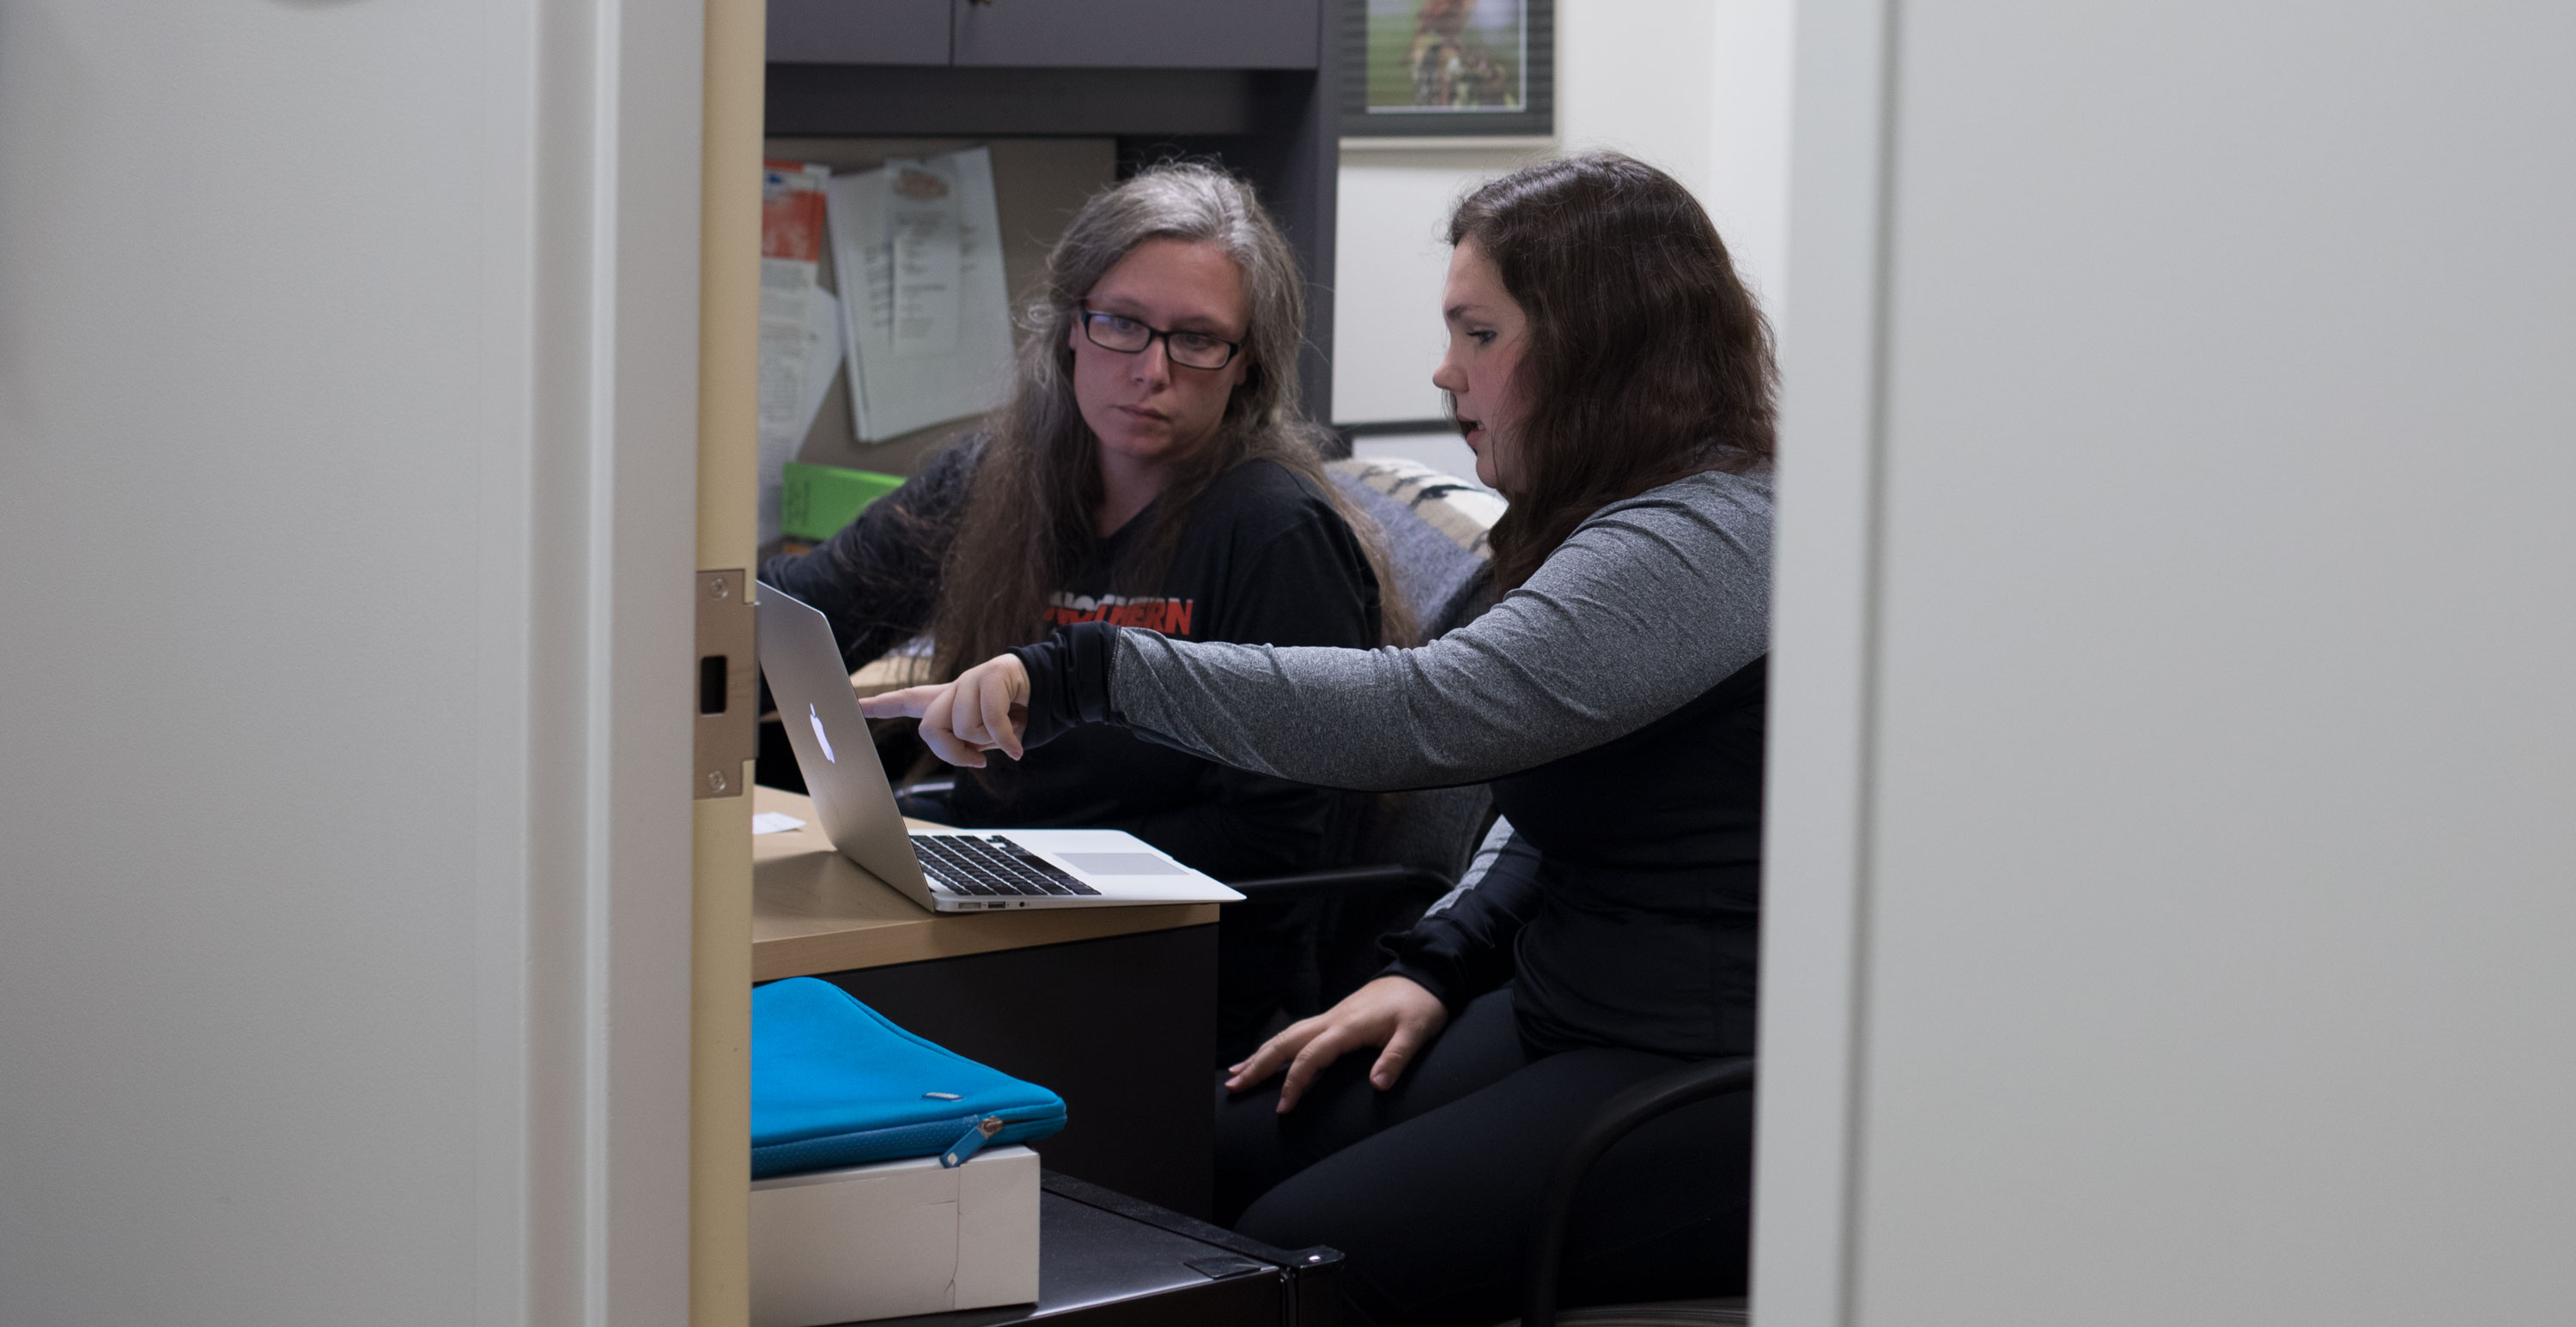 Biology professor helping student in her office.